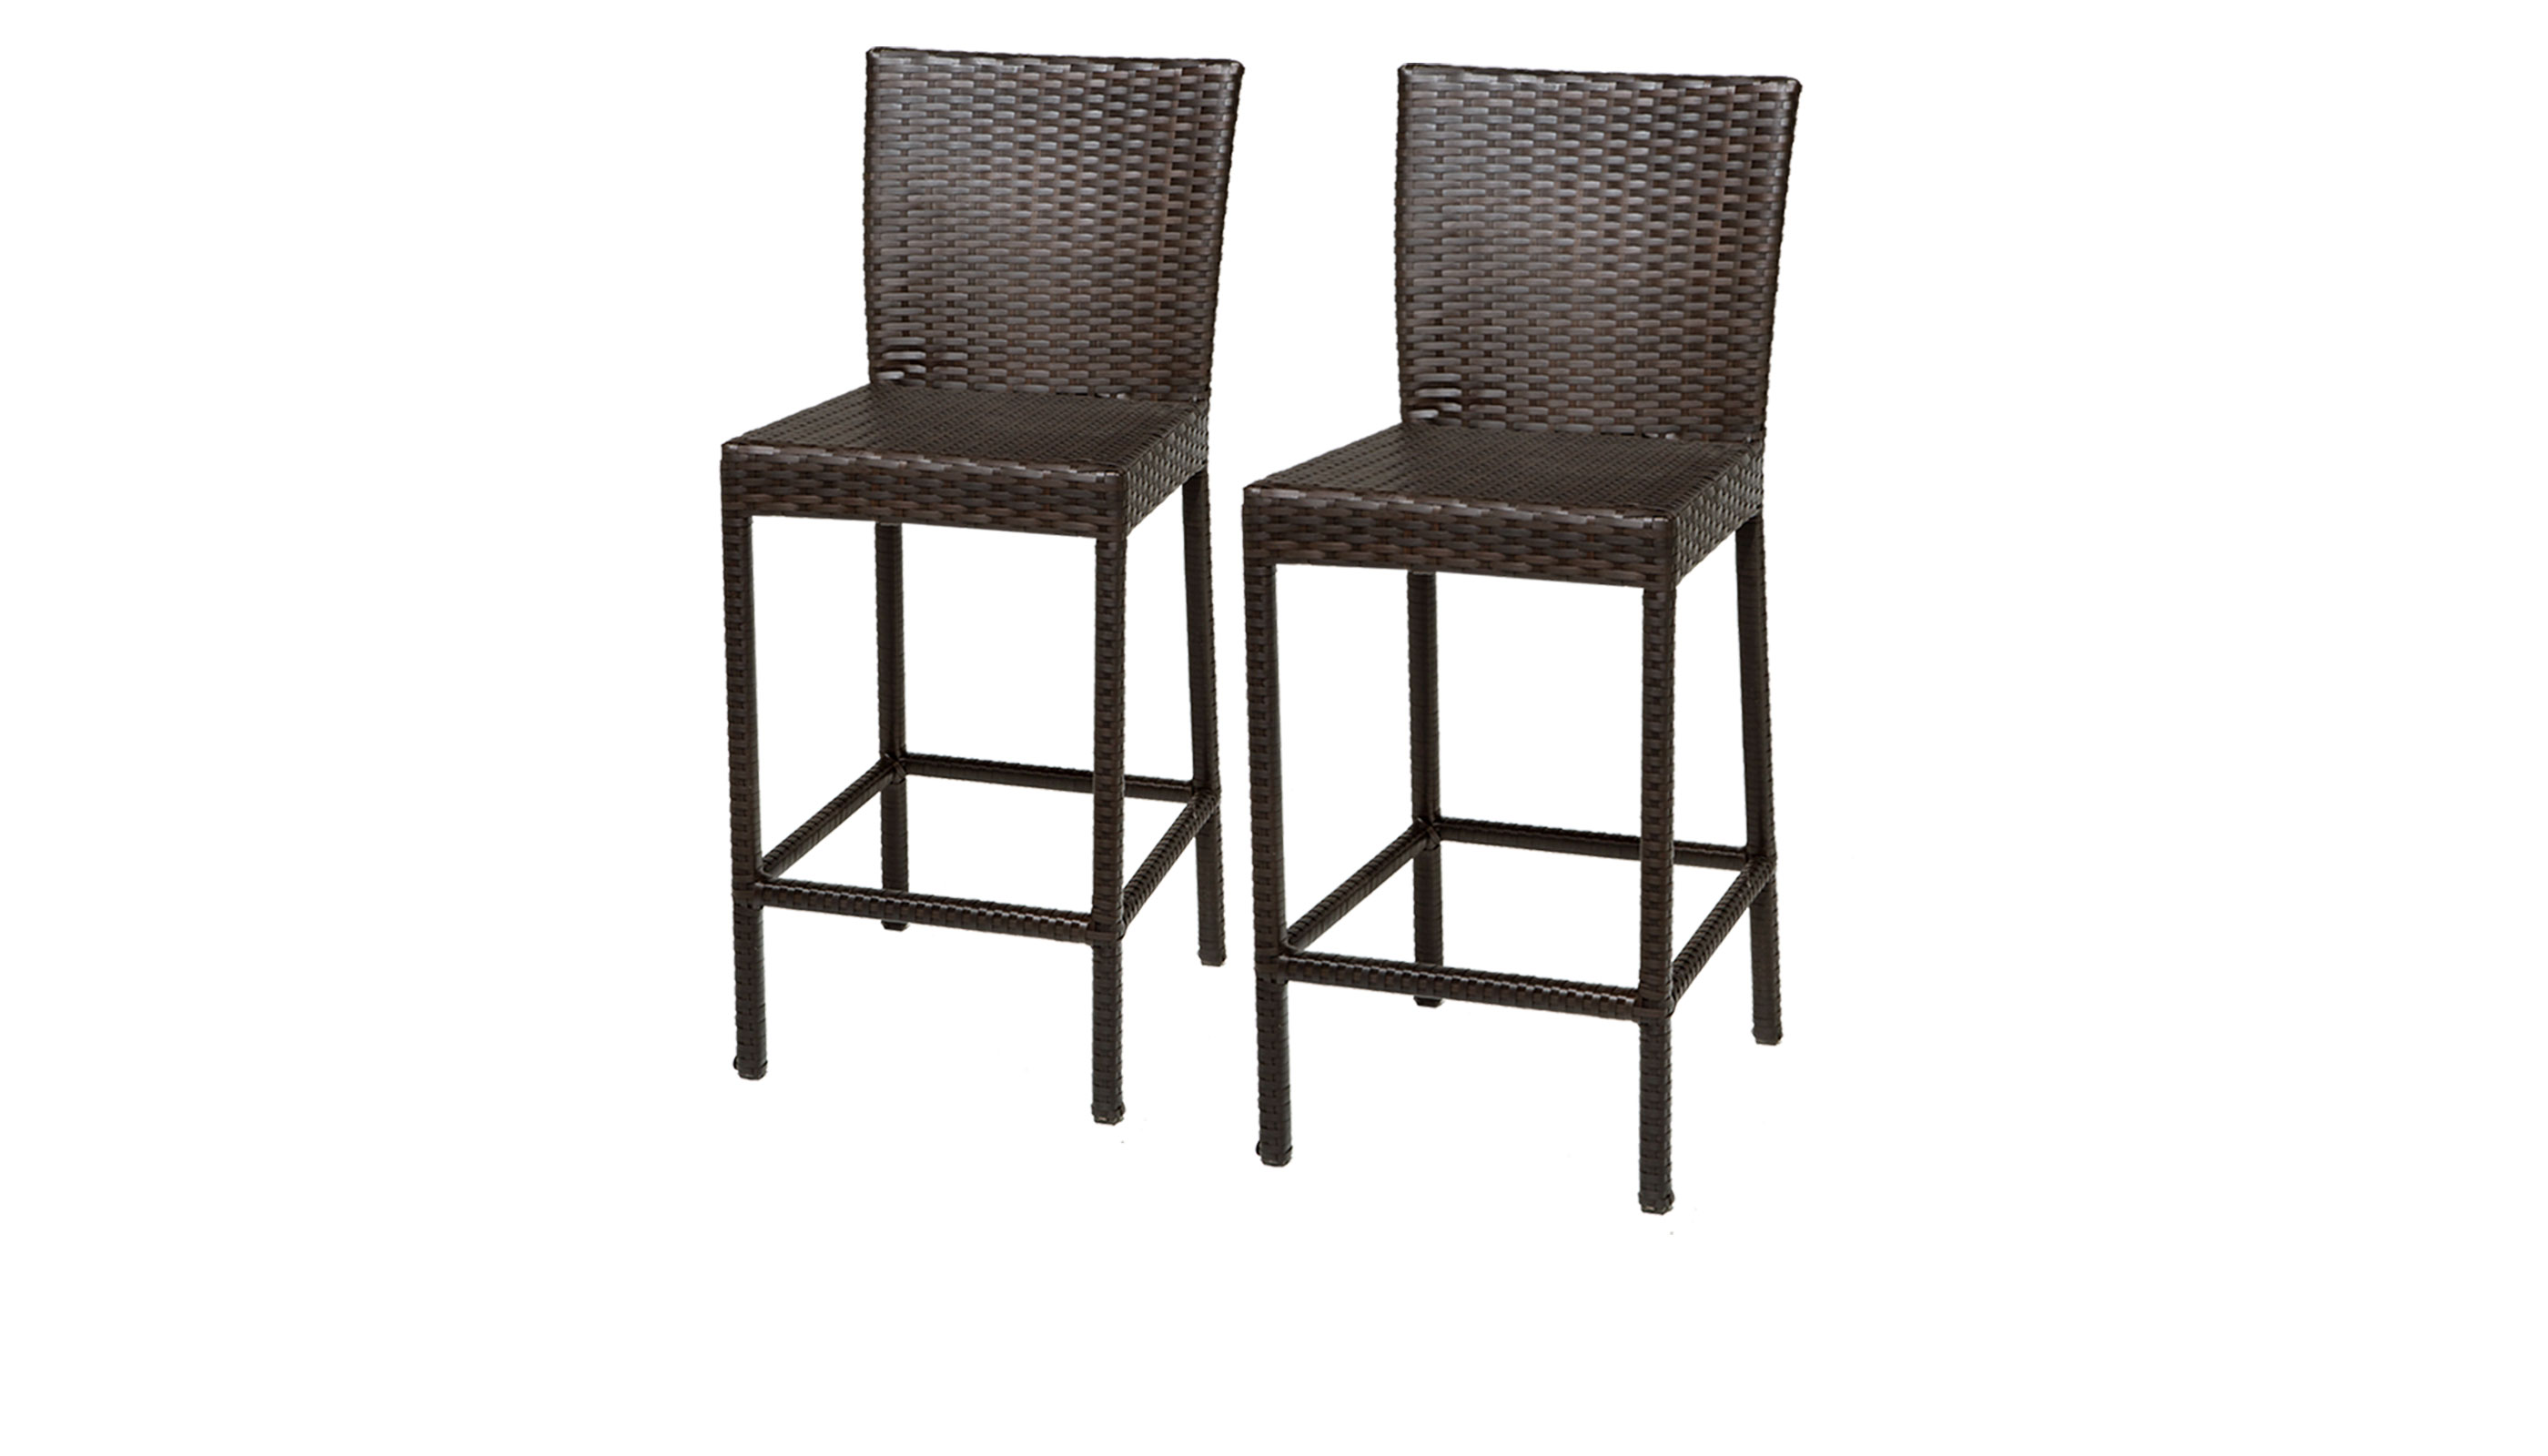 Barbados Bar Table Set with Cart, Basket, and 4 Barstools 7 Piece Outdoor Wicker Patio Furniture - TK Classics